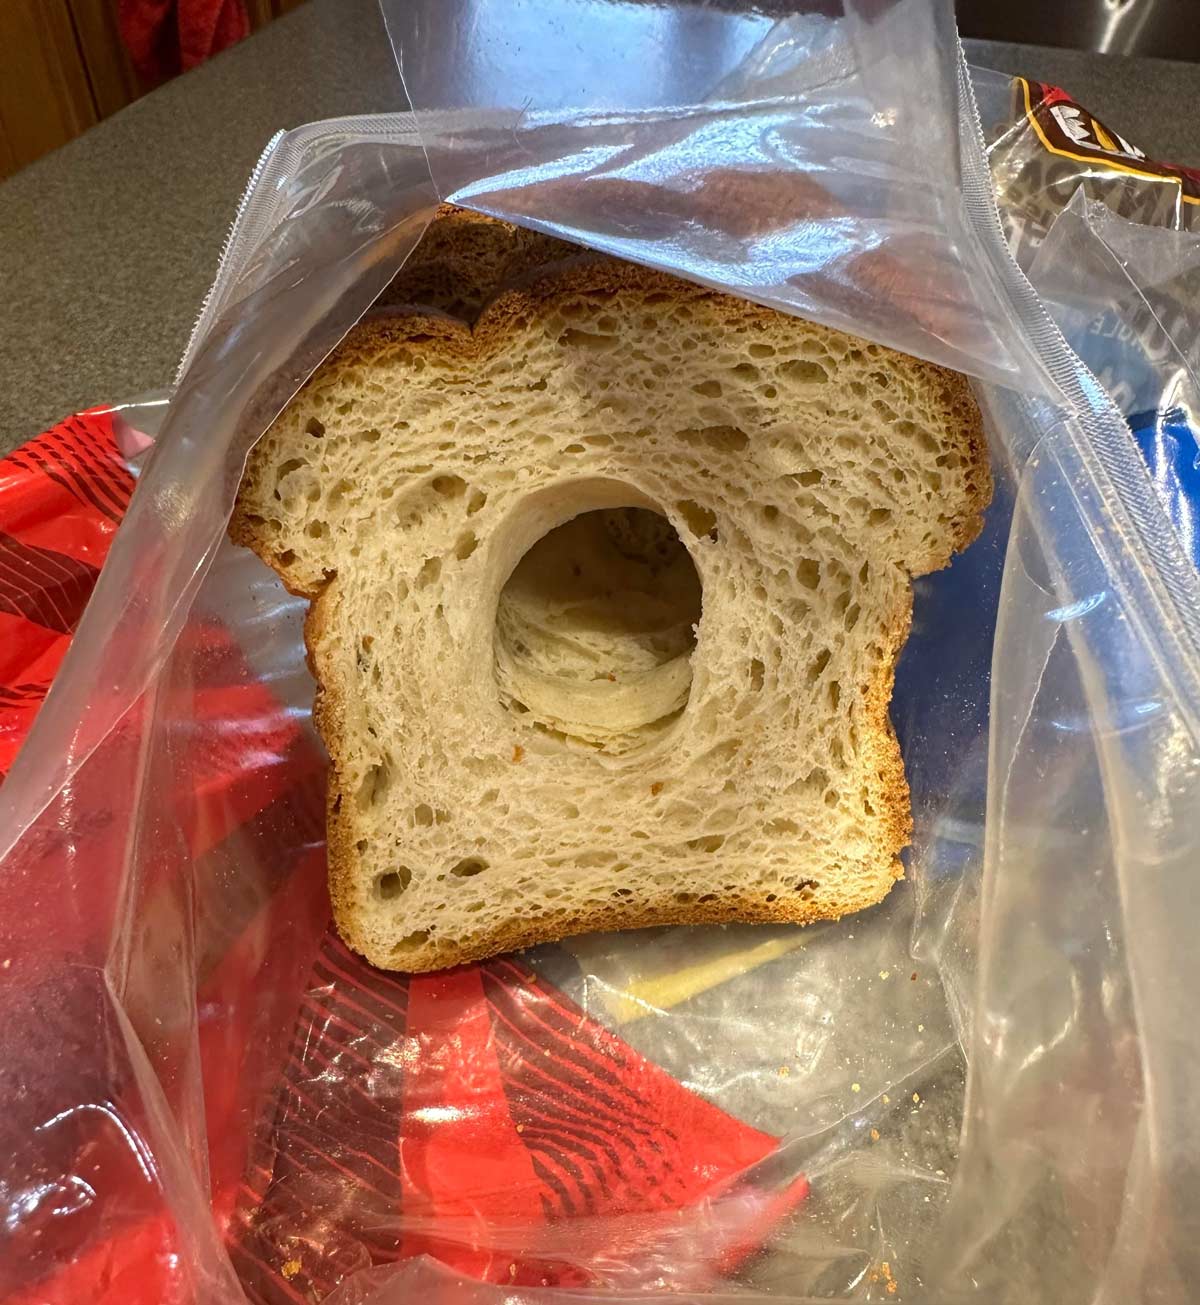 The giant hole(s) in my loaf of bread